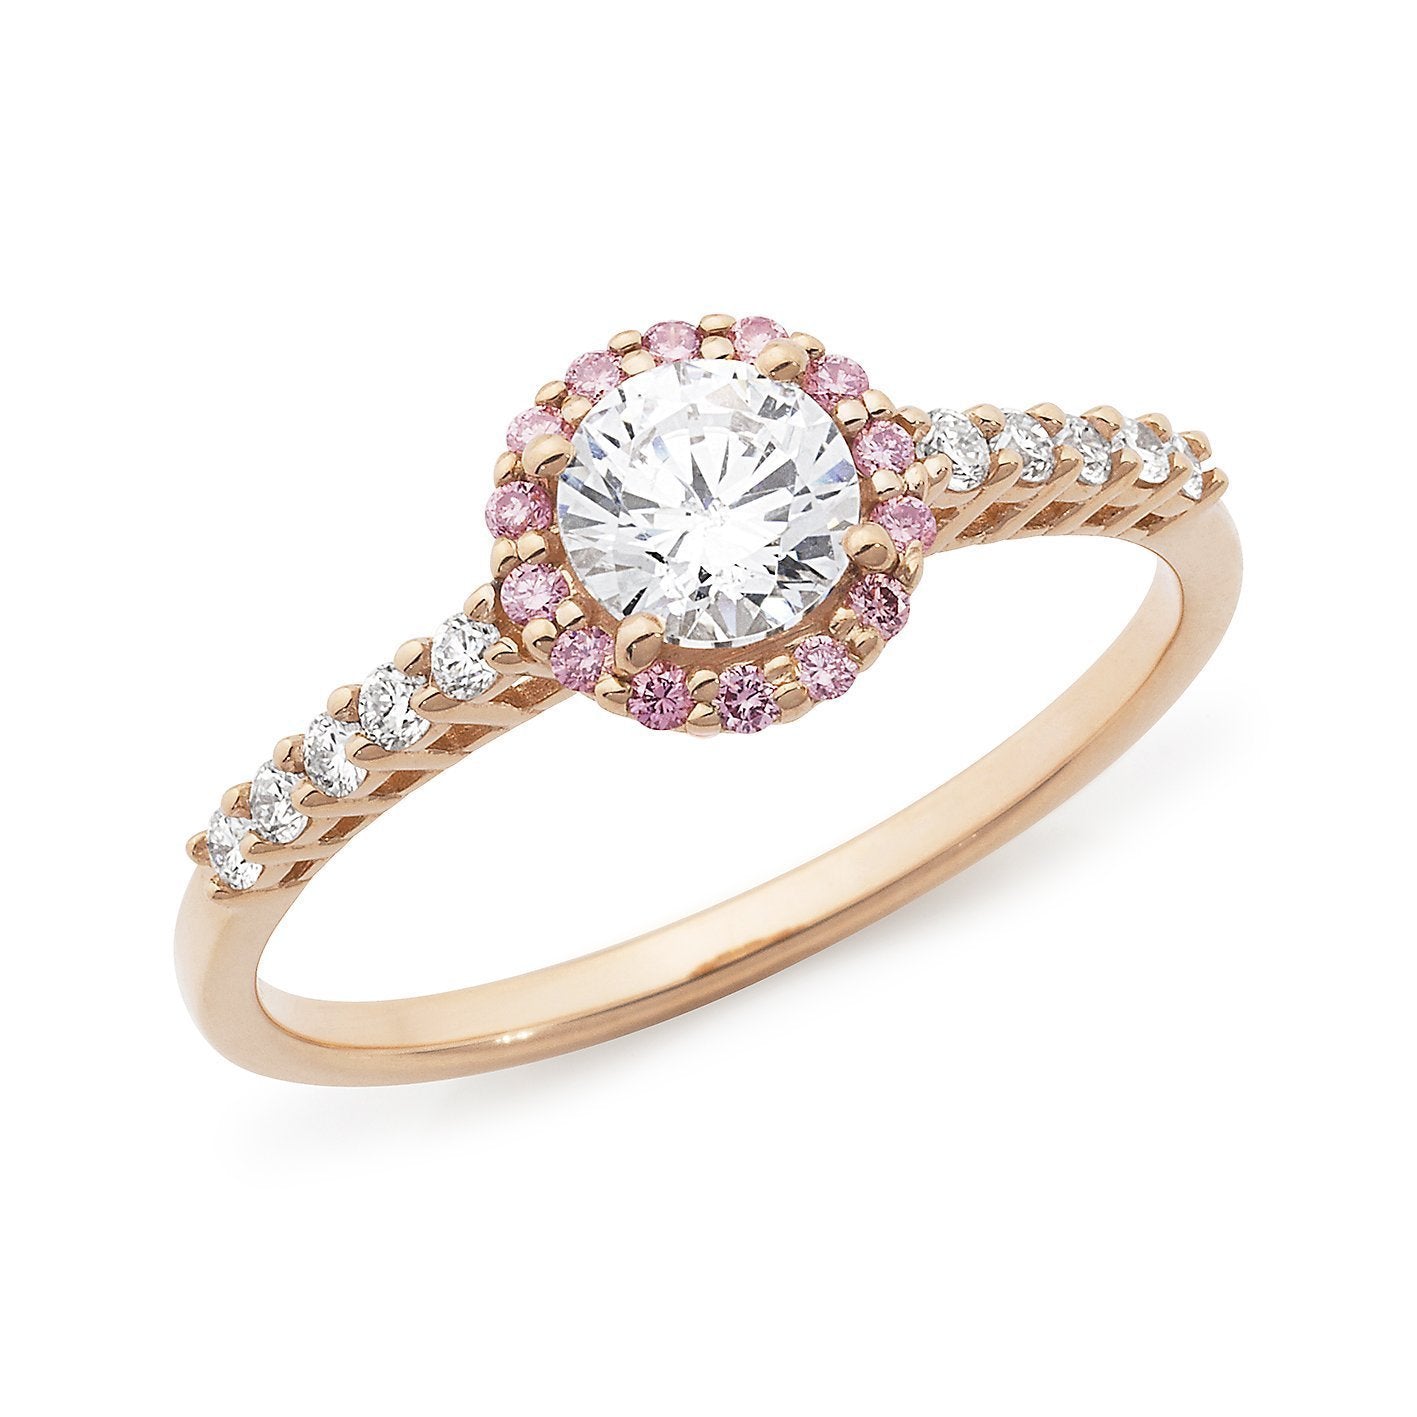 PINK CAVIAR 0.72ct White Round Brilliant Cut & Pink Diamond Halo Engagement Ring in 18ct Rose Gold